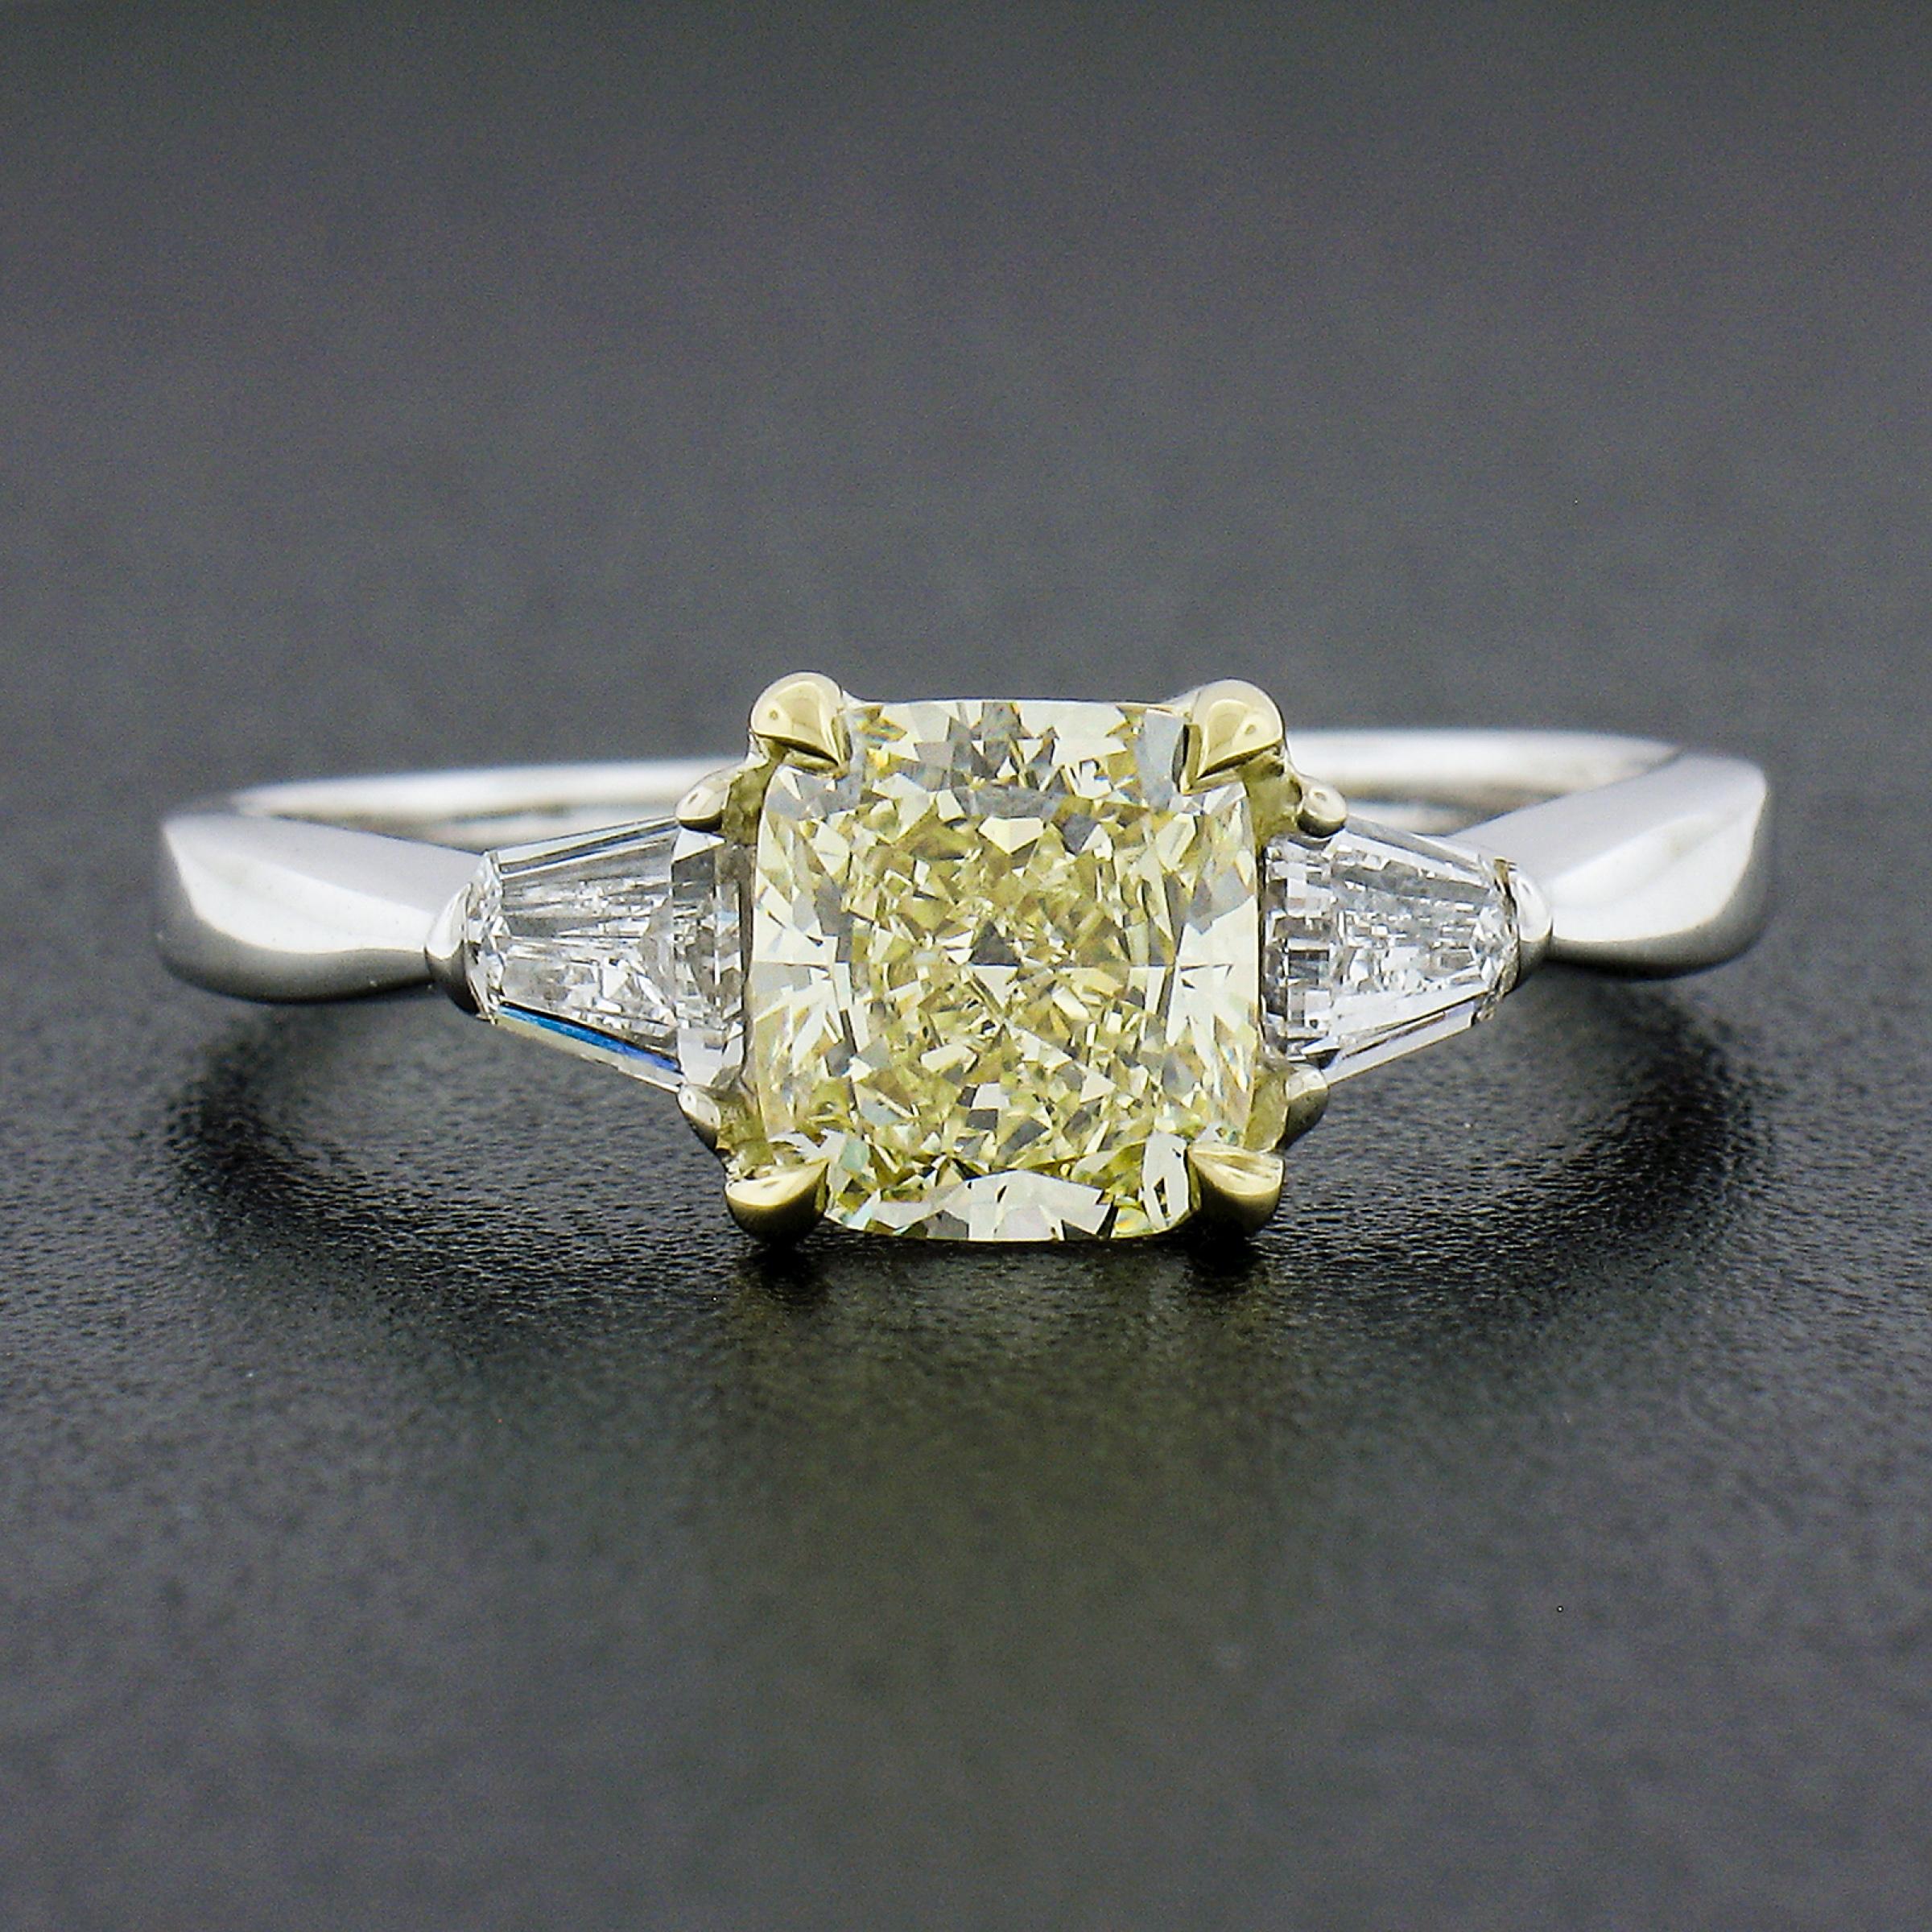 18k Gold 1.83ctw GIA Light Yellow Cushion Brilliant Cut Diamond Engagement Ring In Excellent Condition For Sale In Montclair, NJ